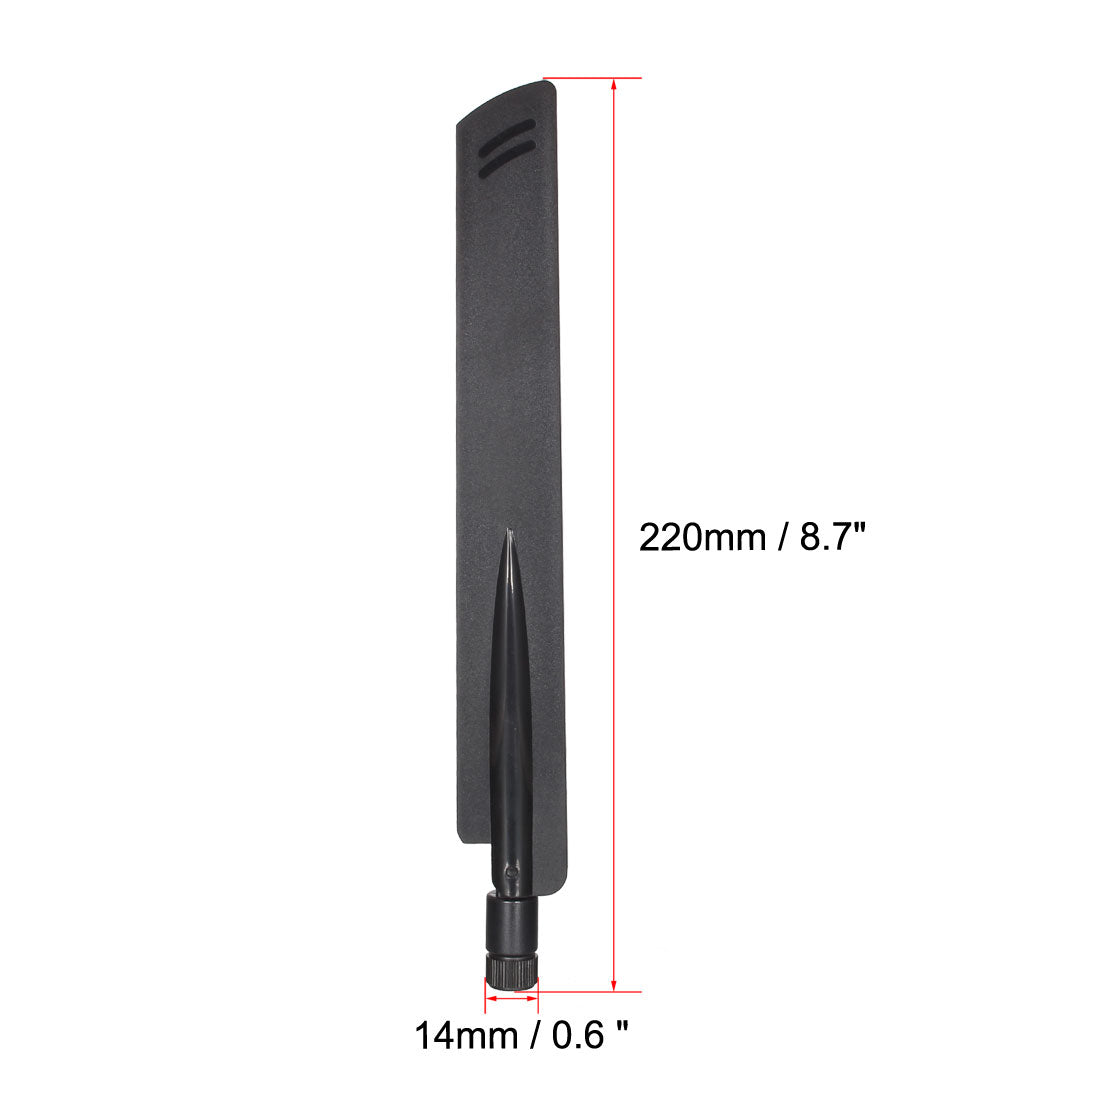 uxcell Uxcell GSM GPRS WCDMA LTE Antenna 3G 4G 10dBi High Gain 700-2700MHz SMA Male Connector Omni Direction Foldable Paddle Type 2Pcs